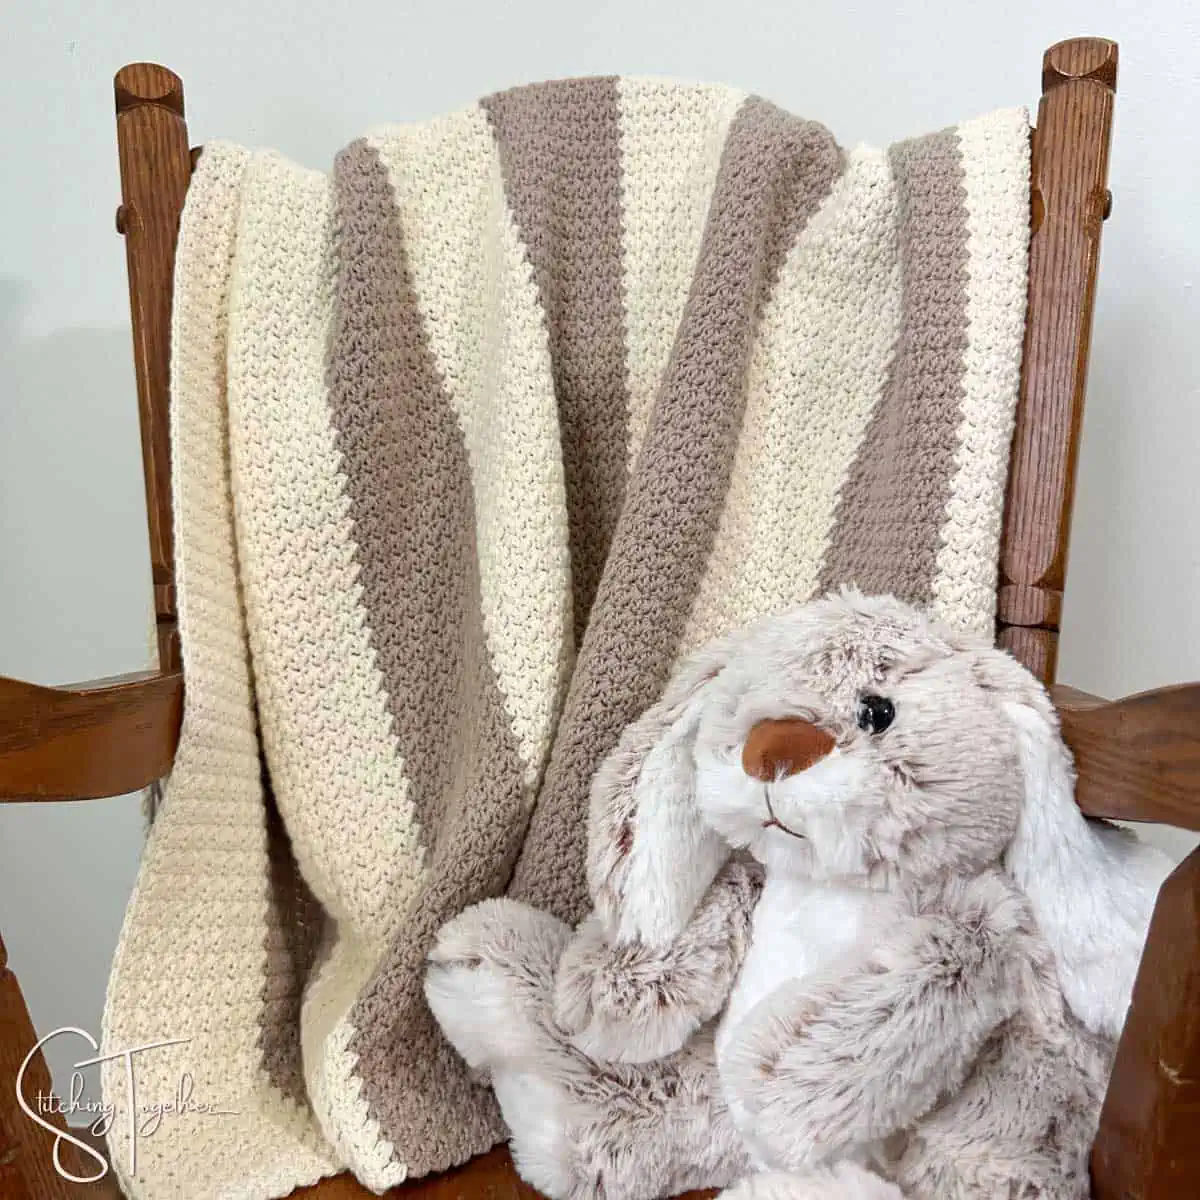 striped crochet blanket draped over the back of a small rocking chair with a stuffed bunny on the seat